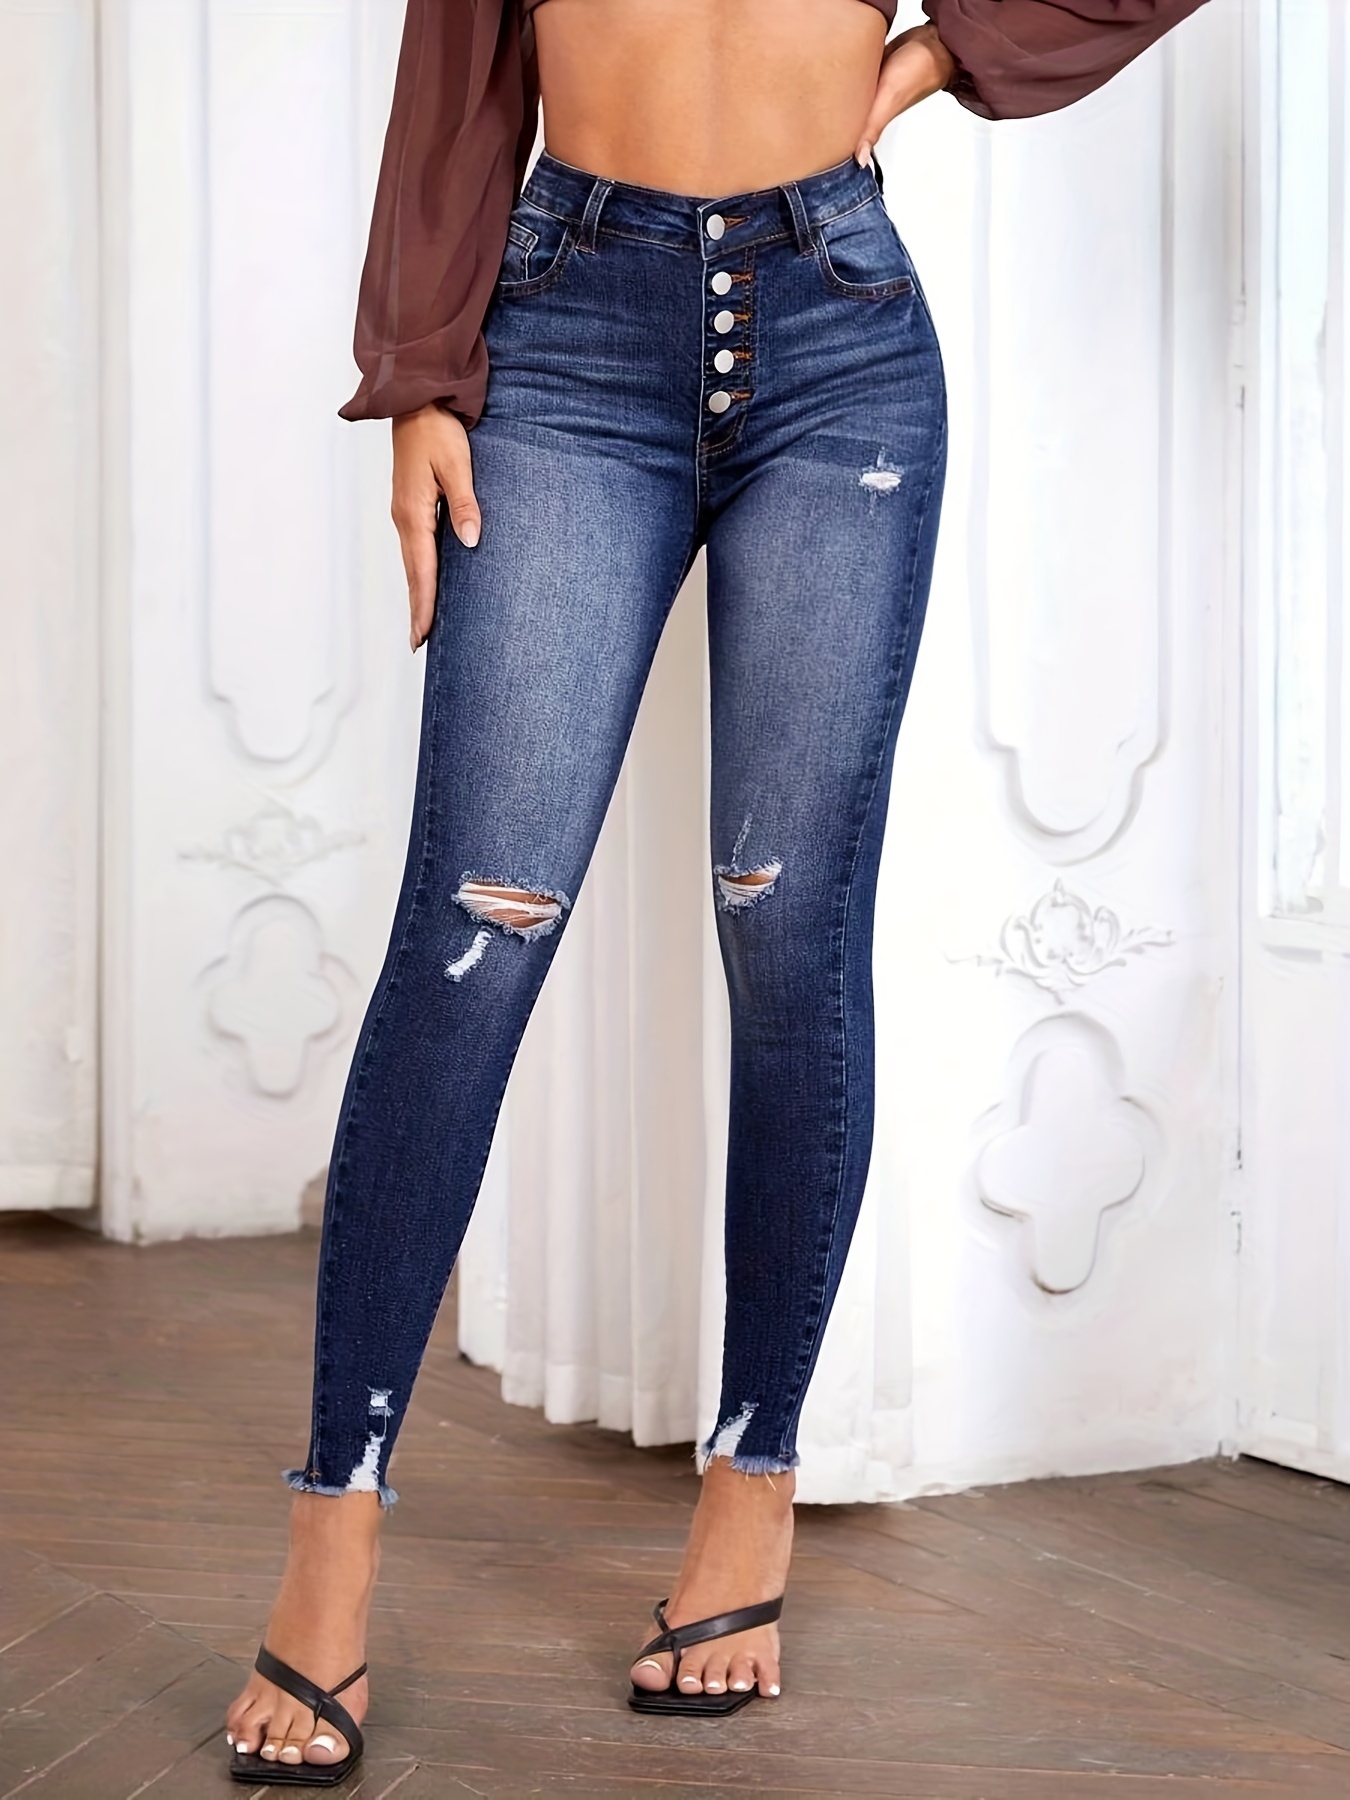 Ripepd Single-breasted * Hem Denim Pants, High * Stretchy Button-fly Skinny  Jeans, Women's Denim Jeans & Clothing